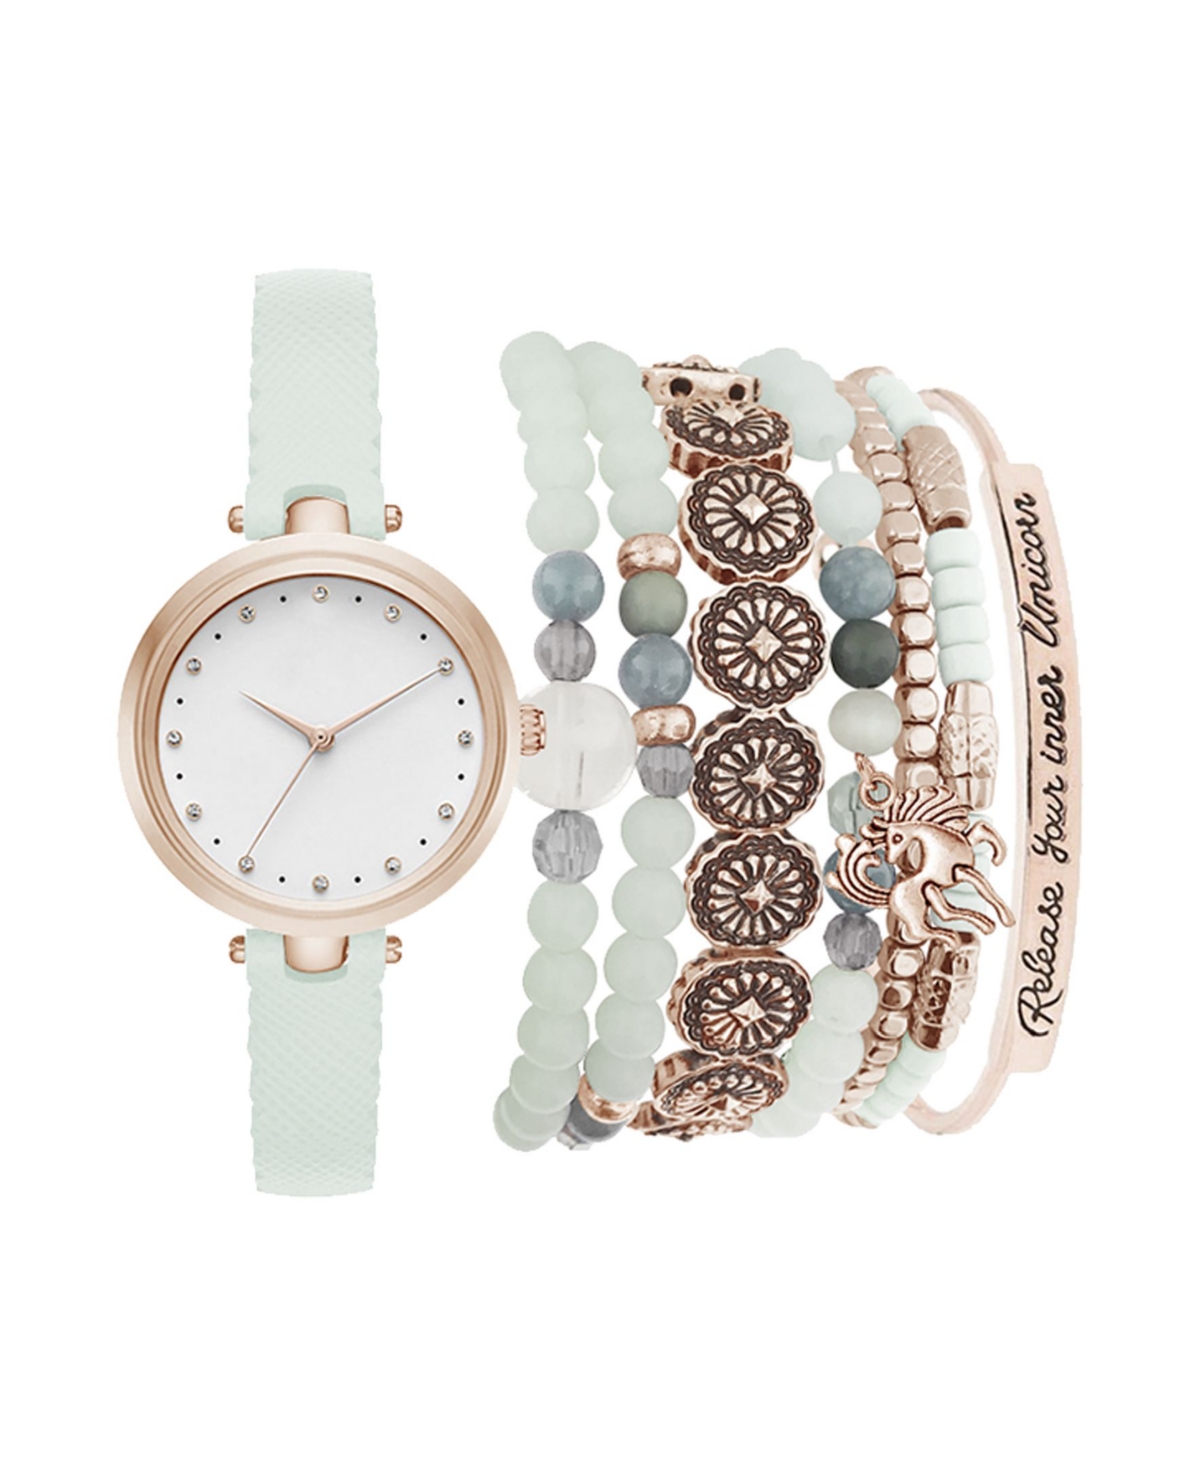 Jessica Carlyle Women's Analog Mint Strap Watch 28mm with Rose Gold-Tone Stackable Bracelets Set